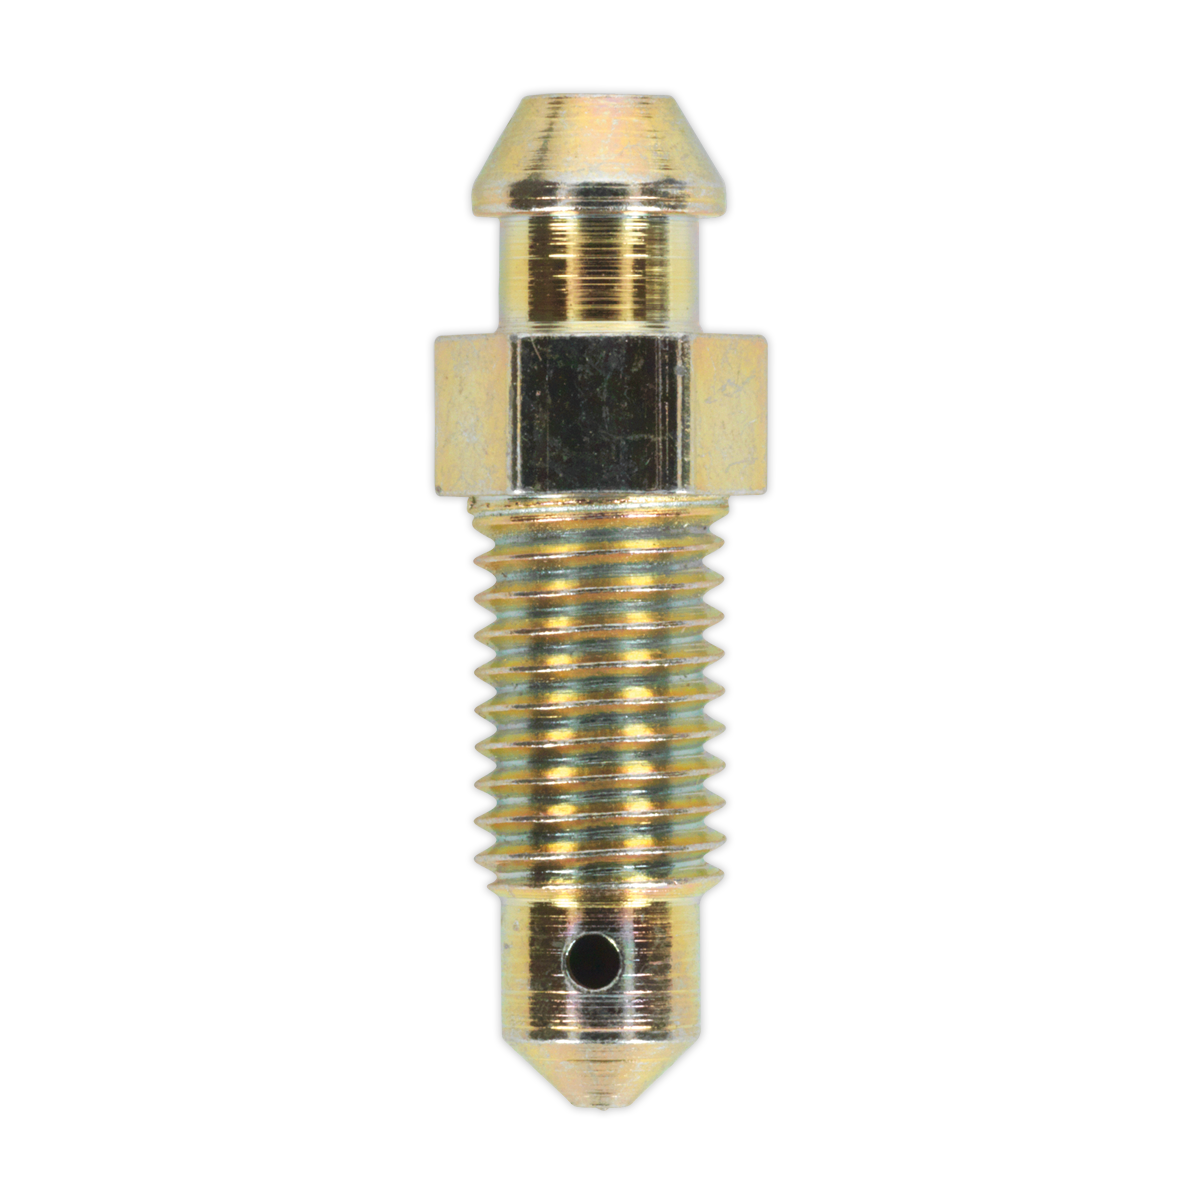 Sealey Brake Bleed Screw M7 x 28mm 1mm Pitch Pack of 10